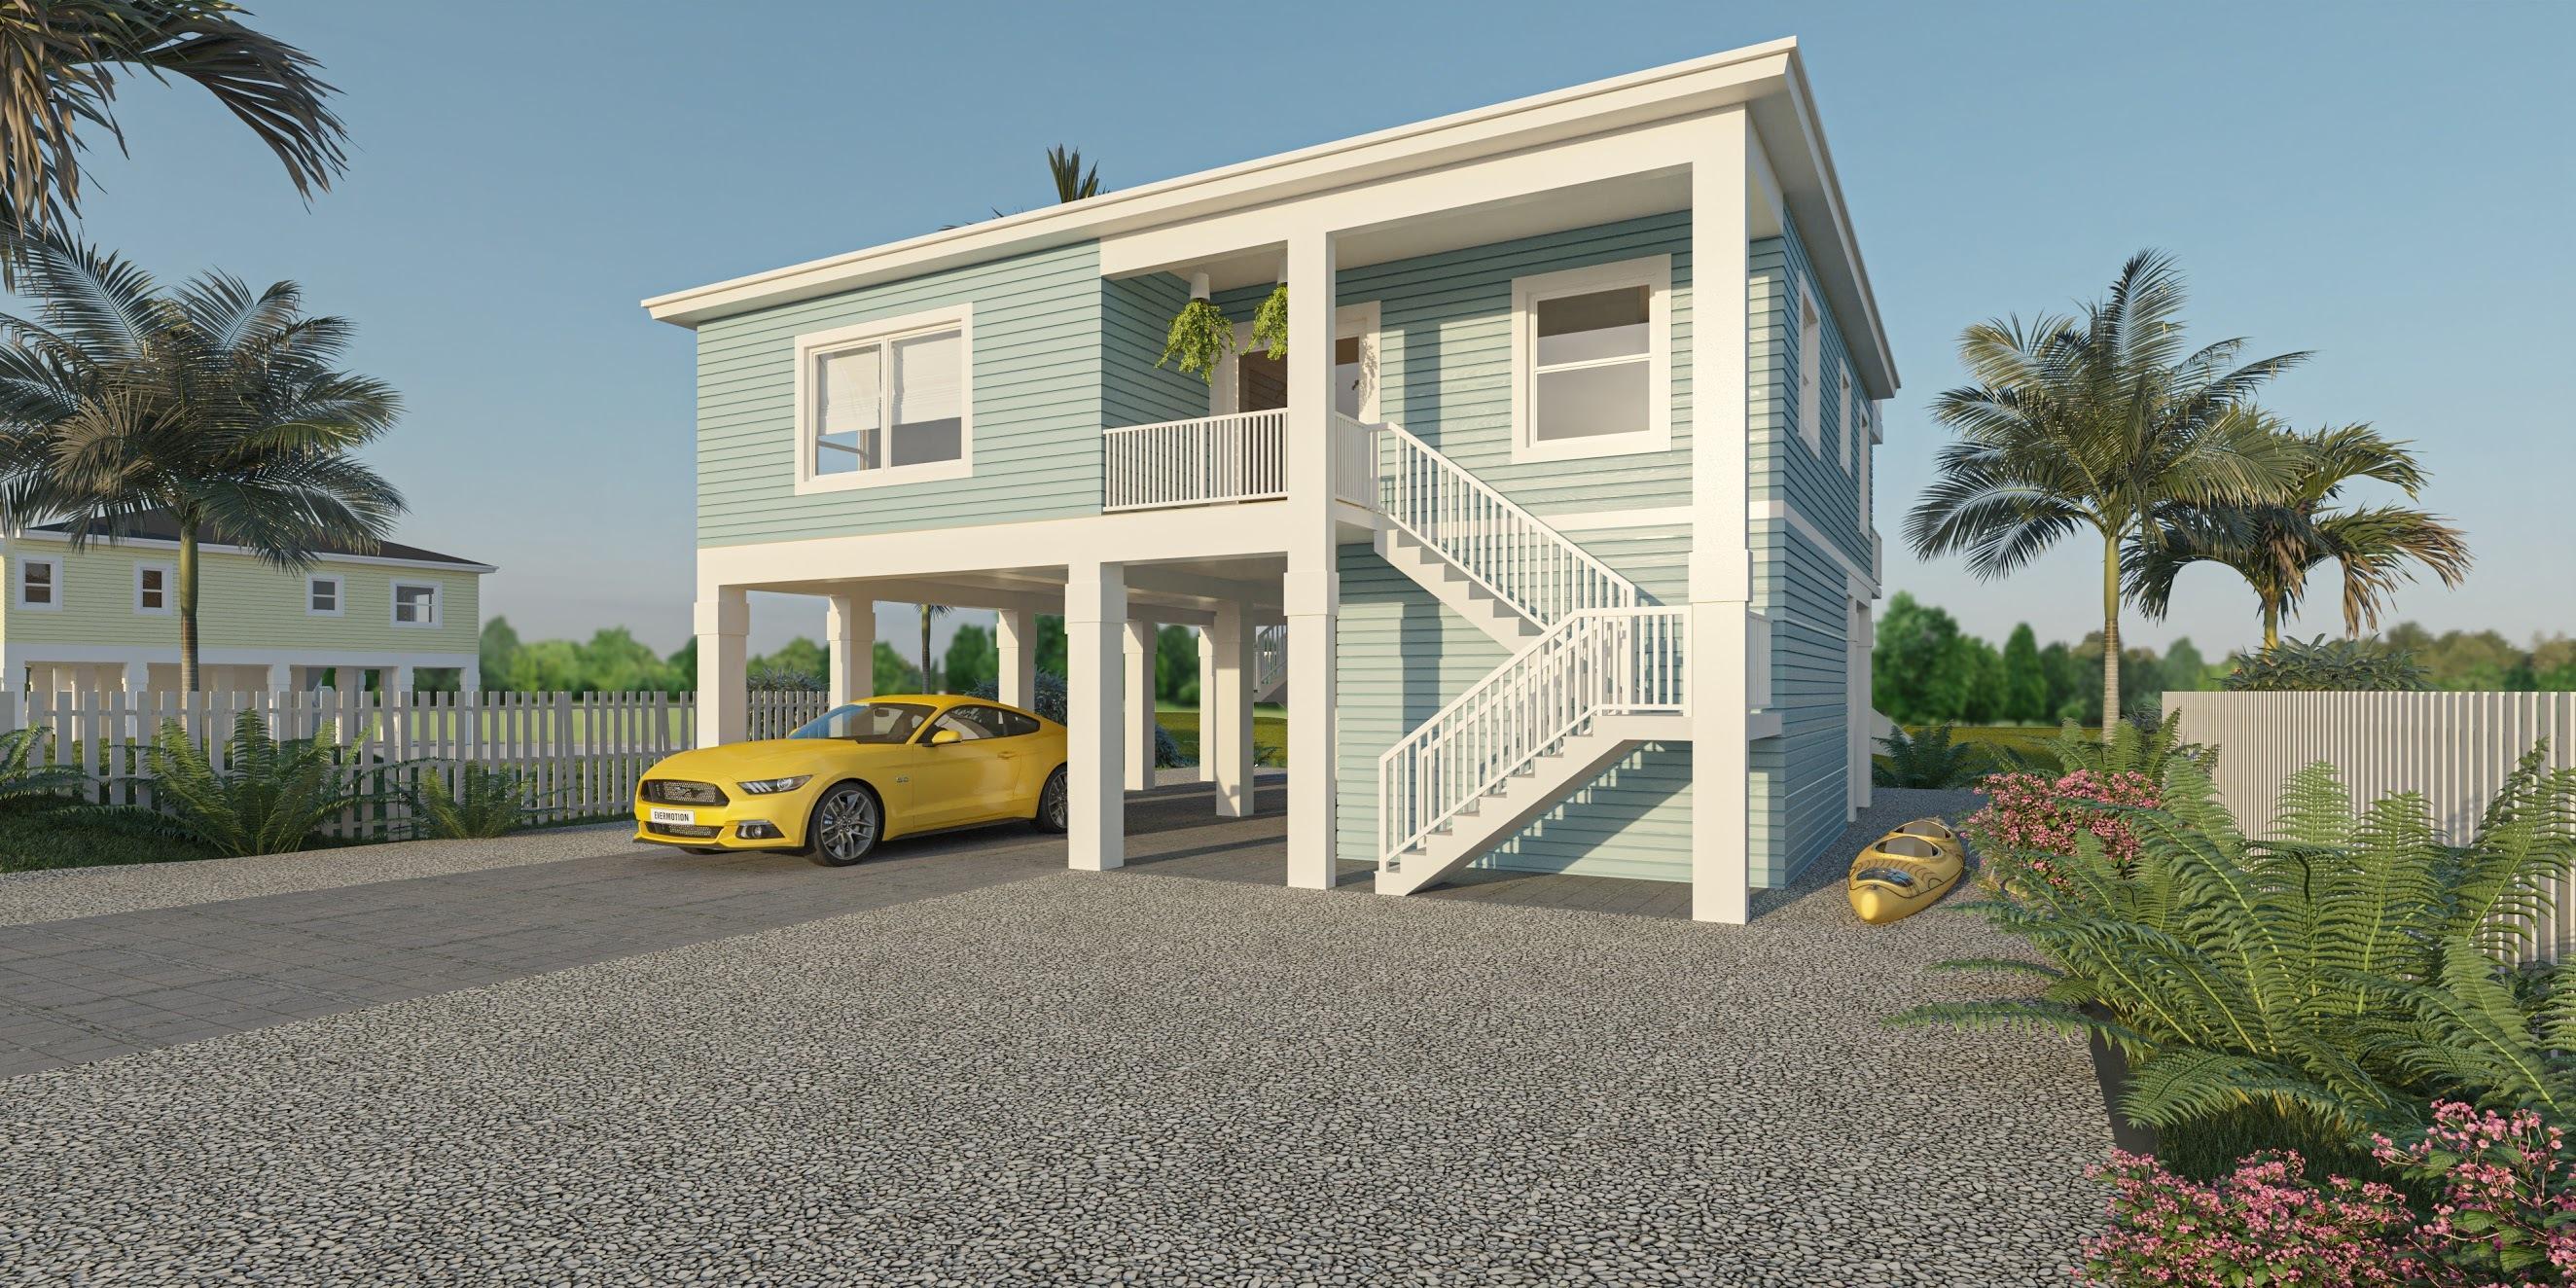 Rendering of Completed Home